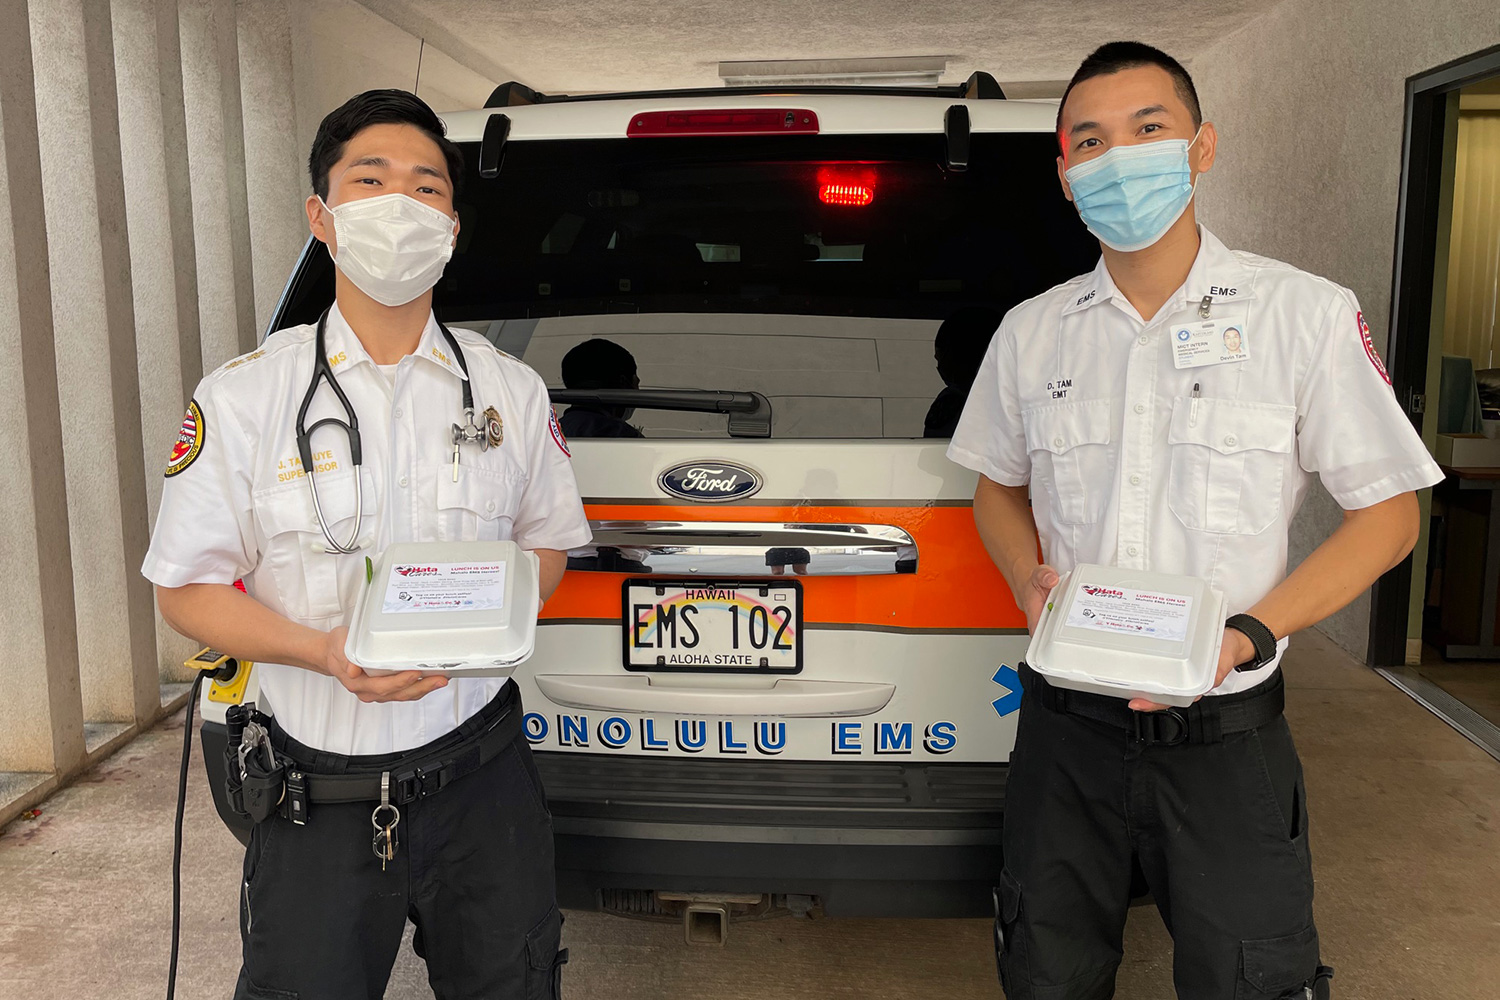 EMS technicians at the City and County of Honolulu